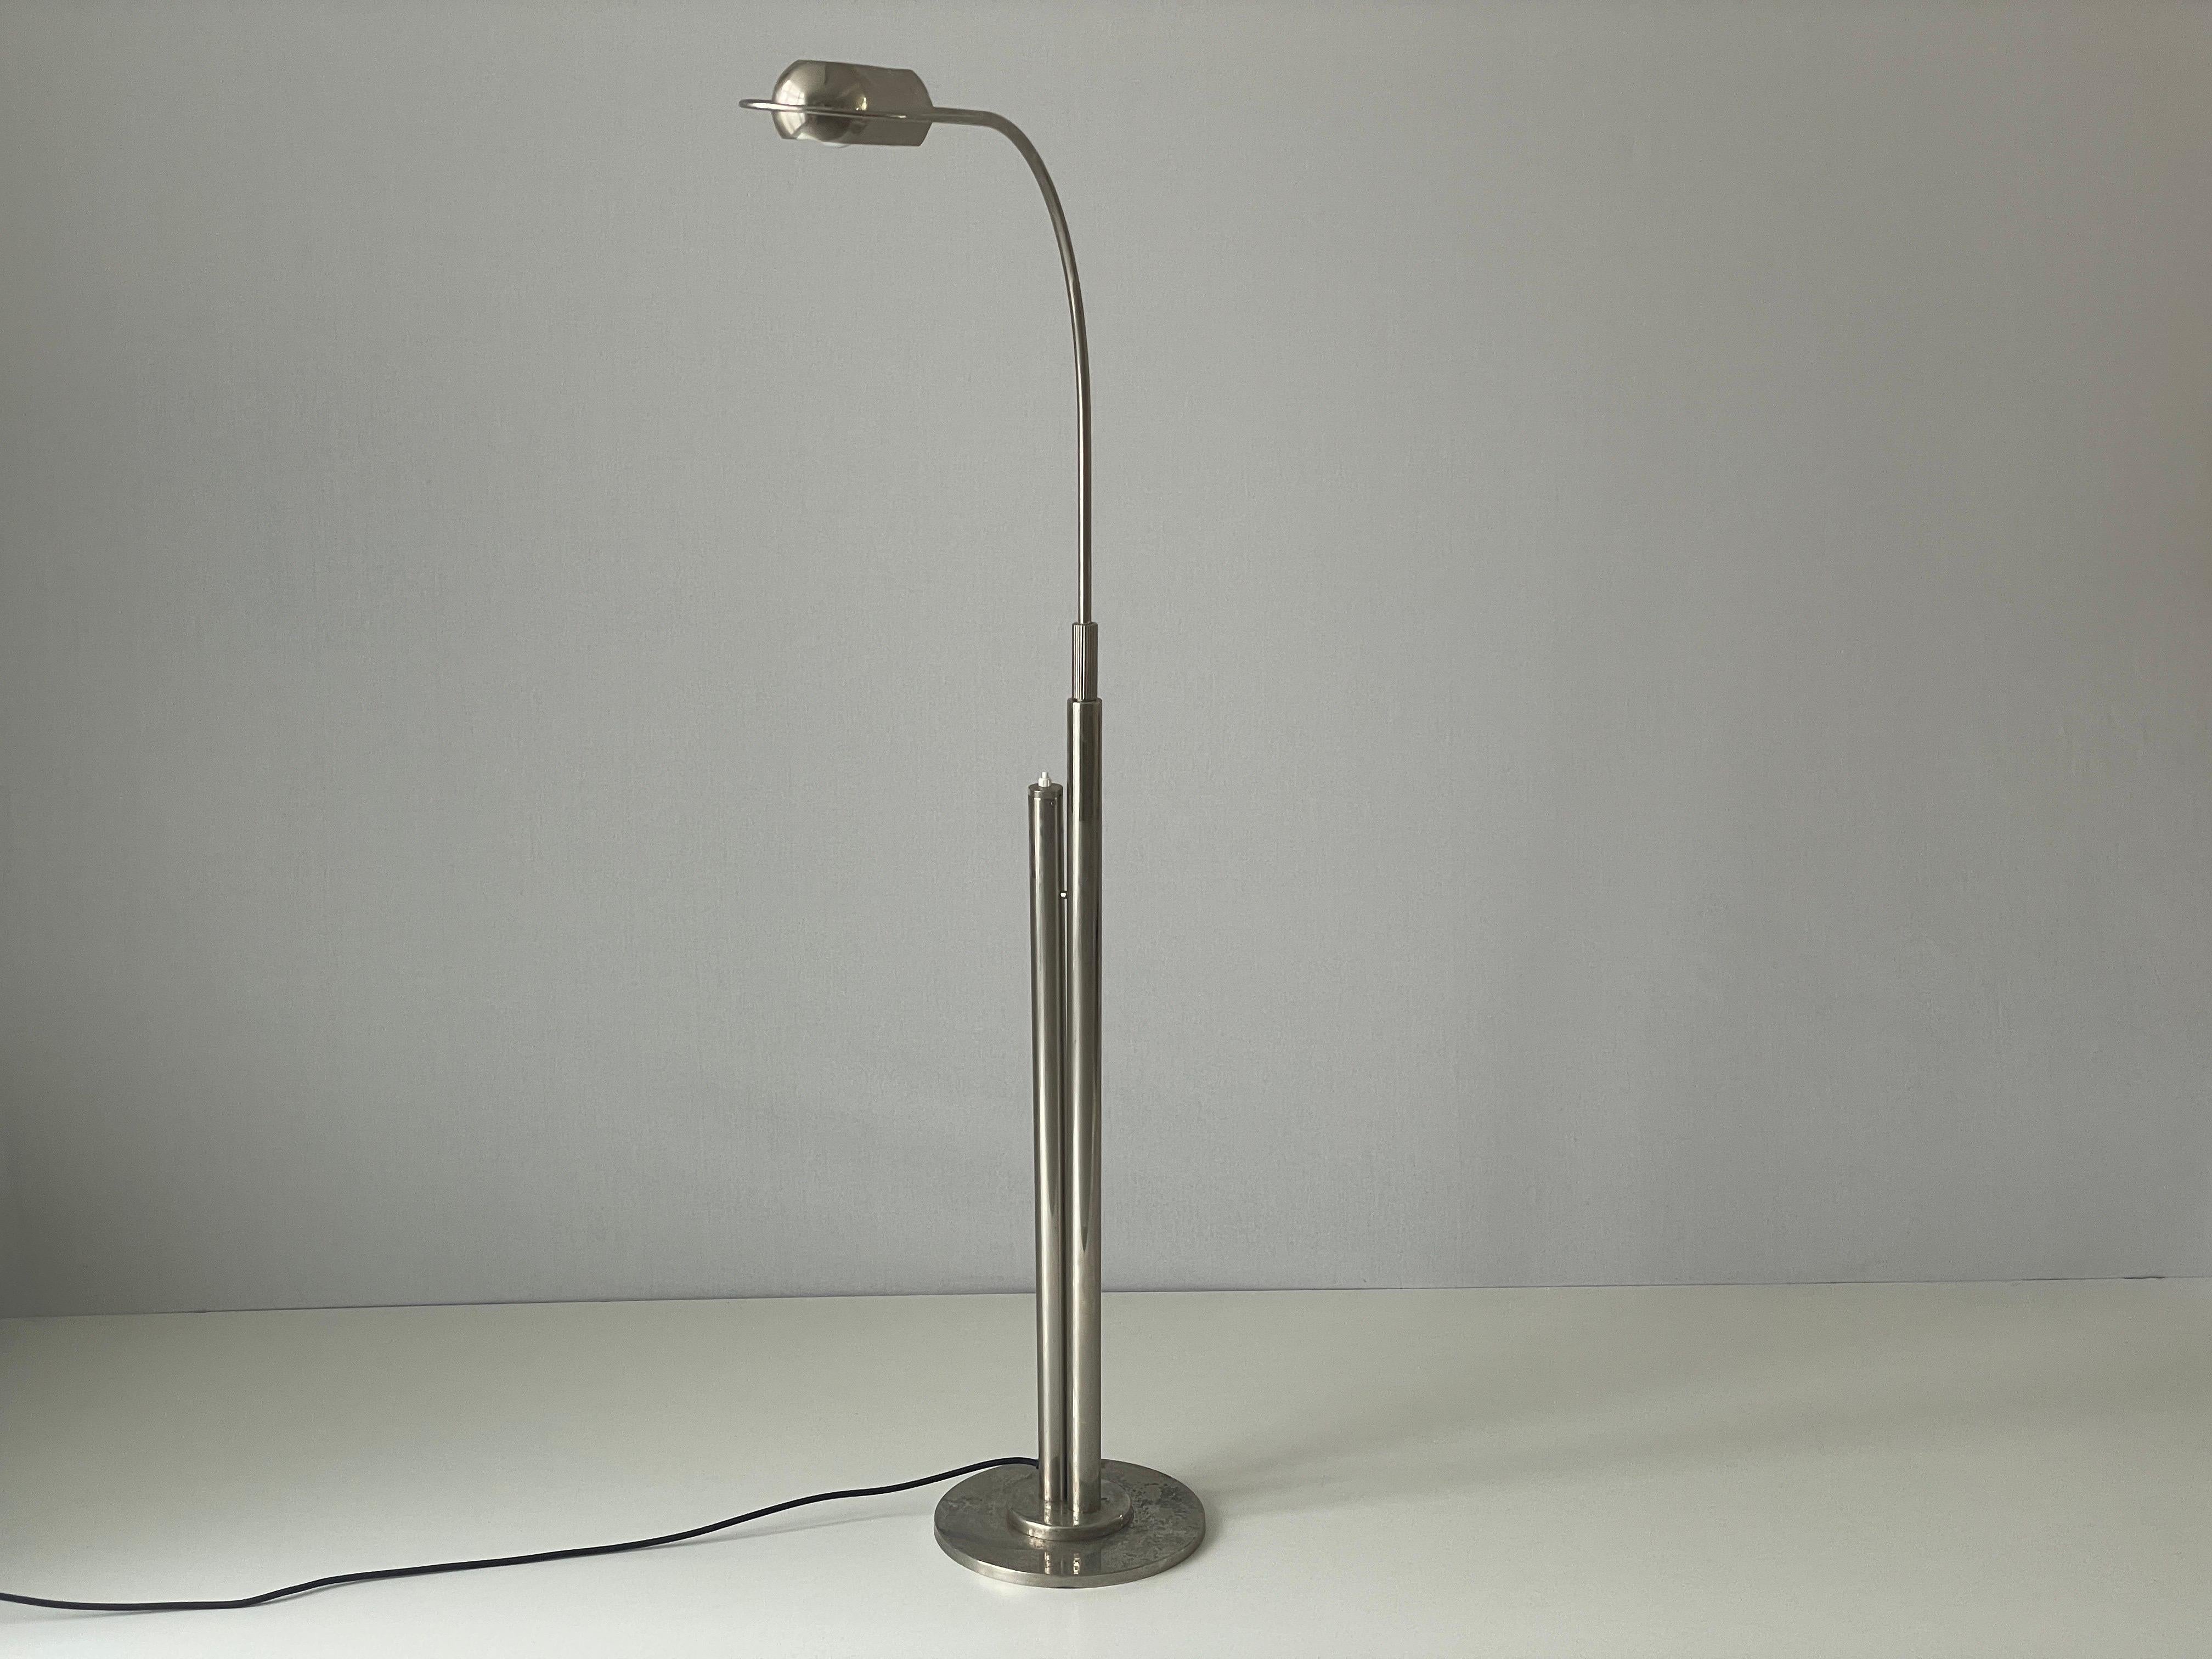 Floor Lamp by Florian Schulz, 1970s, Germany

This lamp works with E27 light bulb. Max 100W
Wired and suitable to use with 220V and 110V for all countries.

Measurements:
Height: 148 cm
Width: 84 cm
Depth: 13 cm
Shade: 26 cm x 13 cm x 6 cm
Base: 28